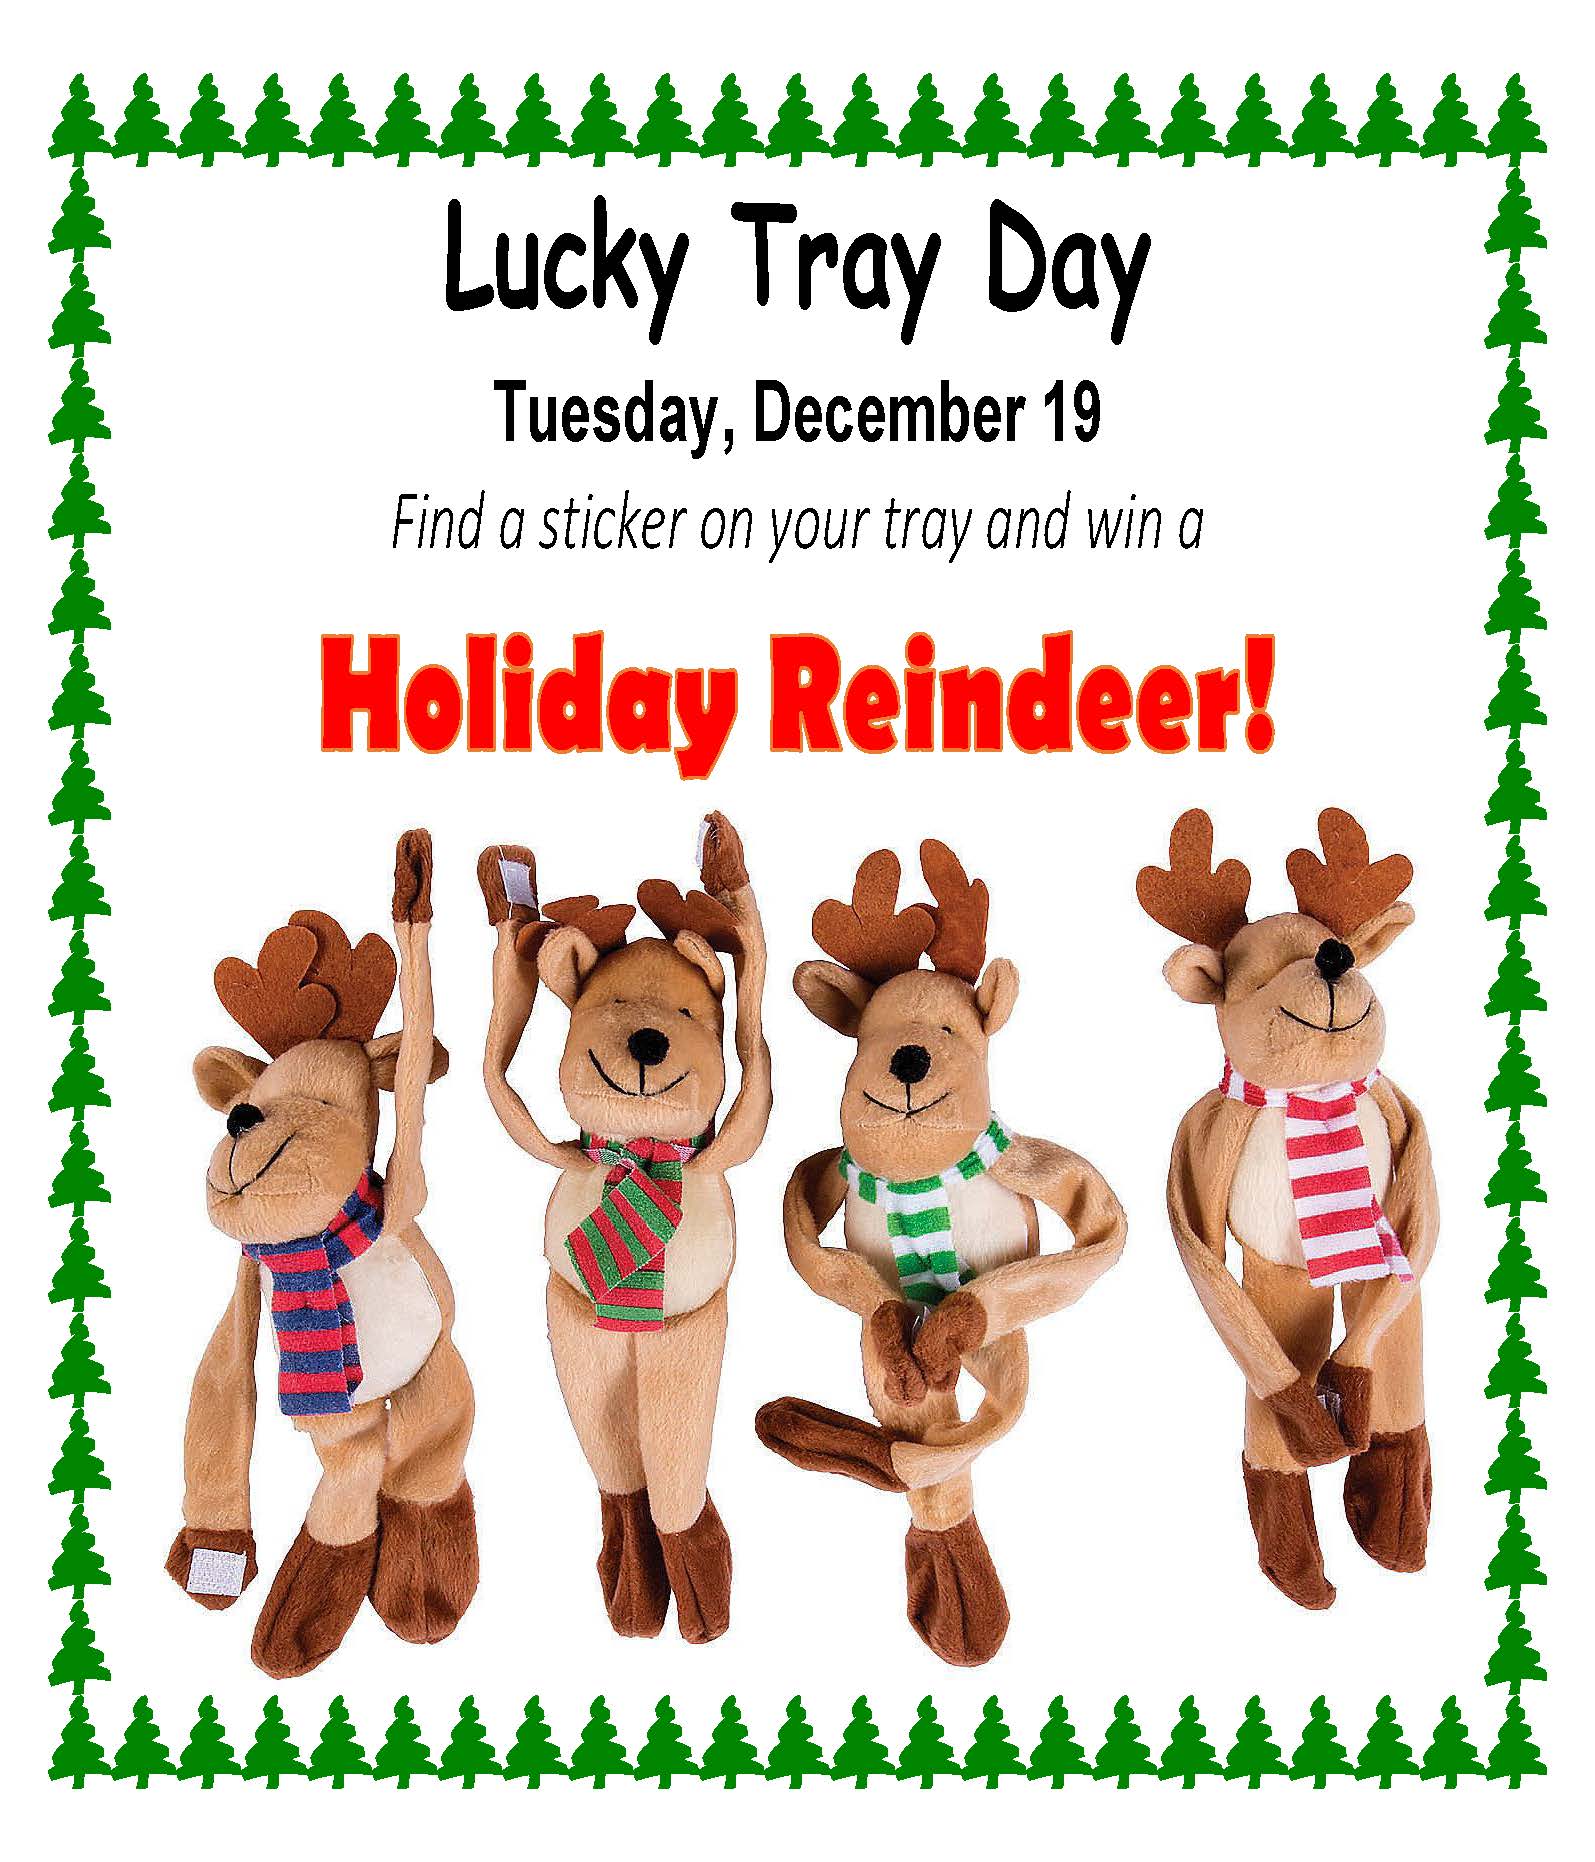 December Lucky Tray Day in the School Cafeteria!